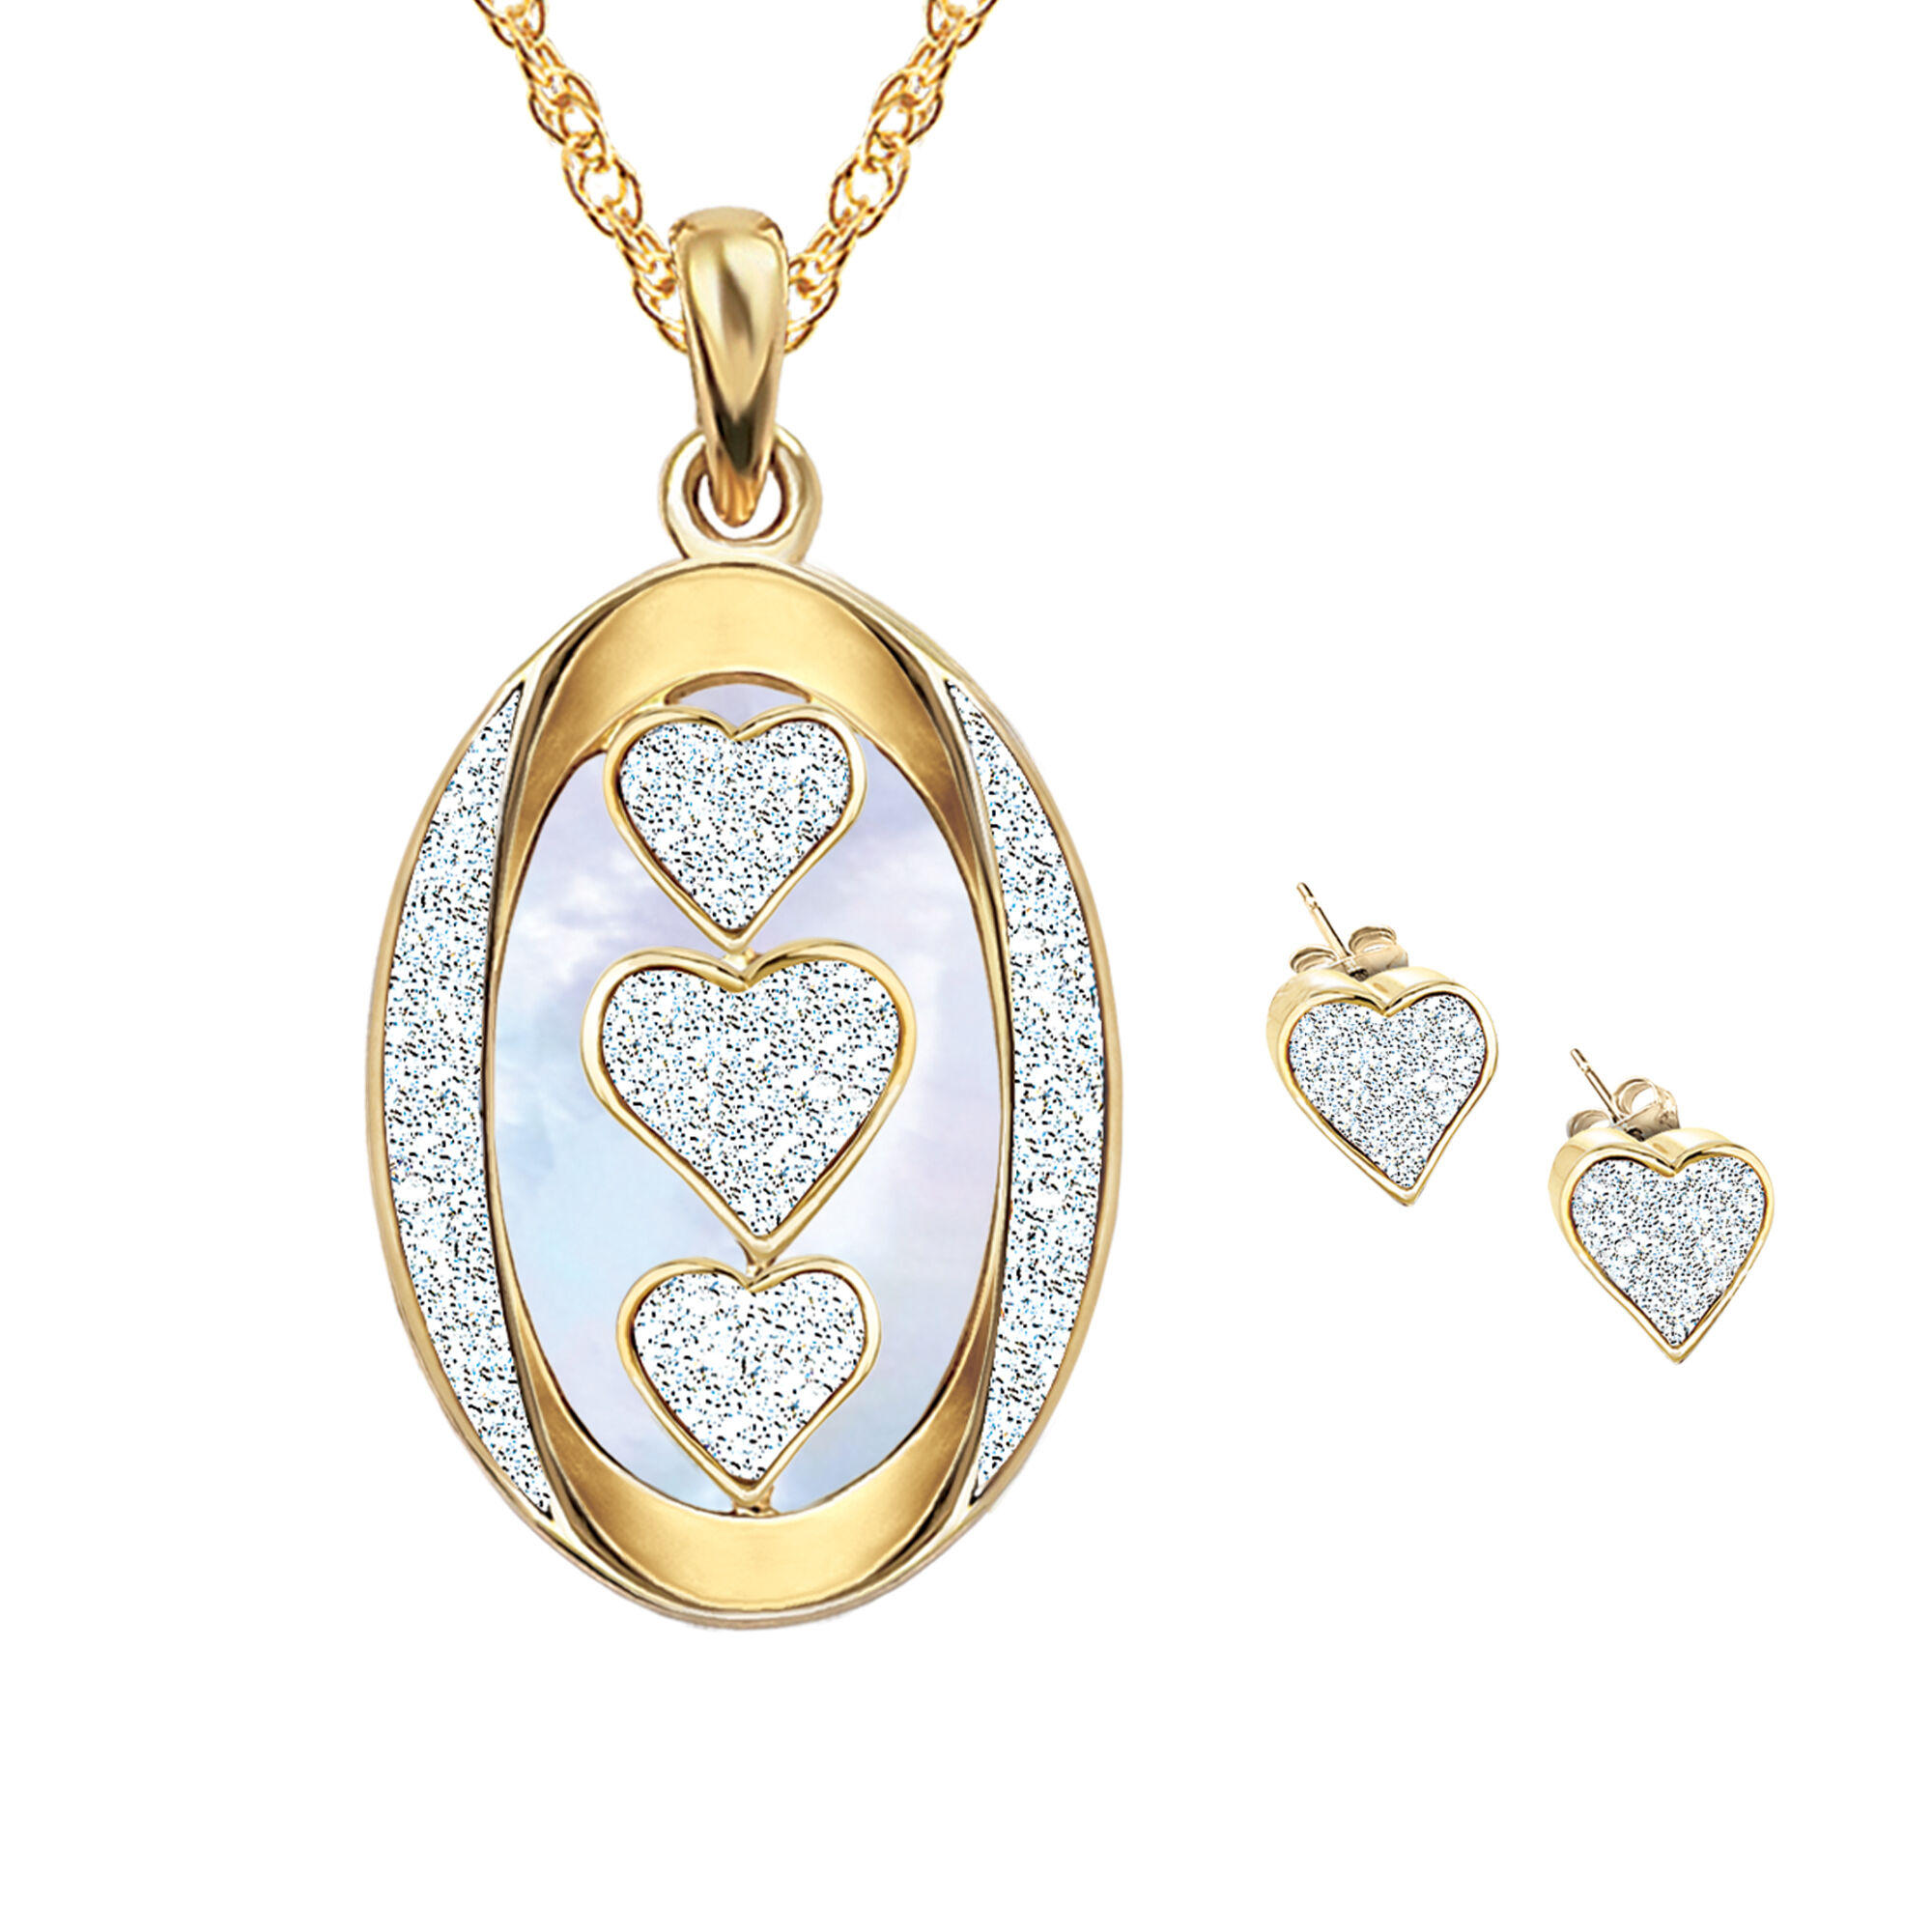 I Love You Personalized Diamond Pendant with FREE Matching Earrings 5238 0060 a main